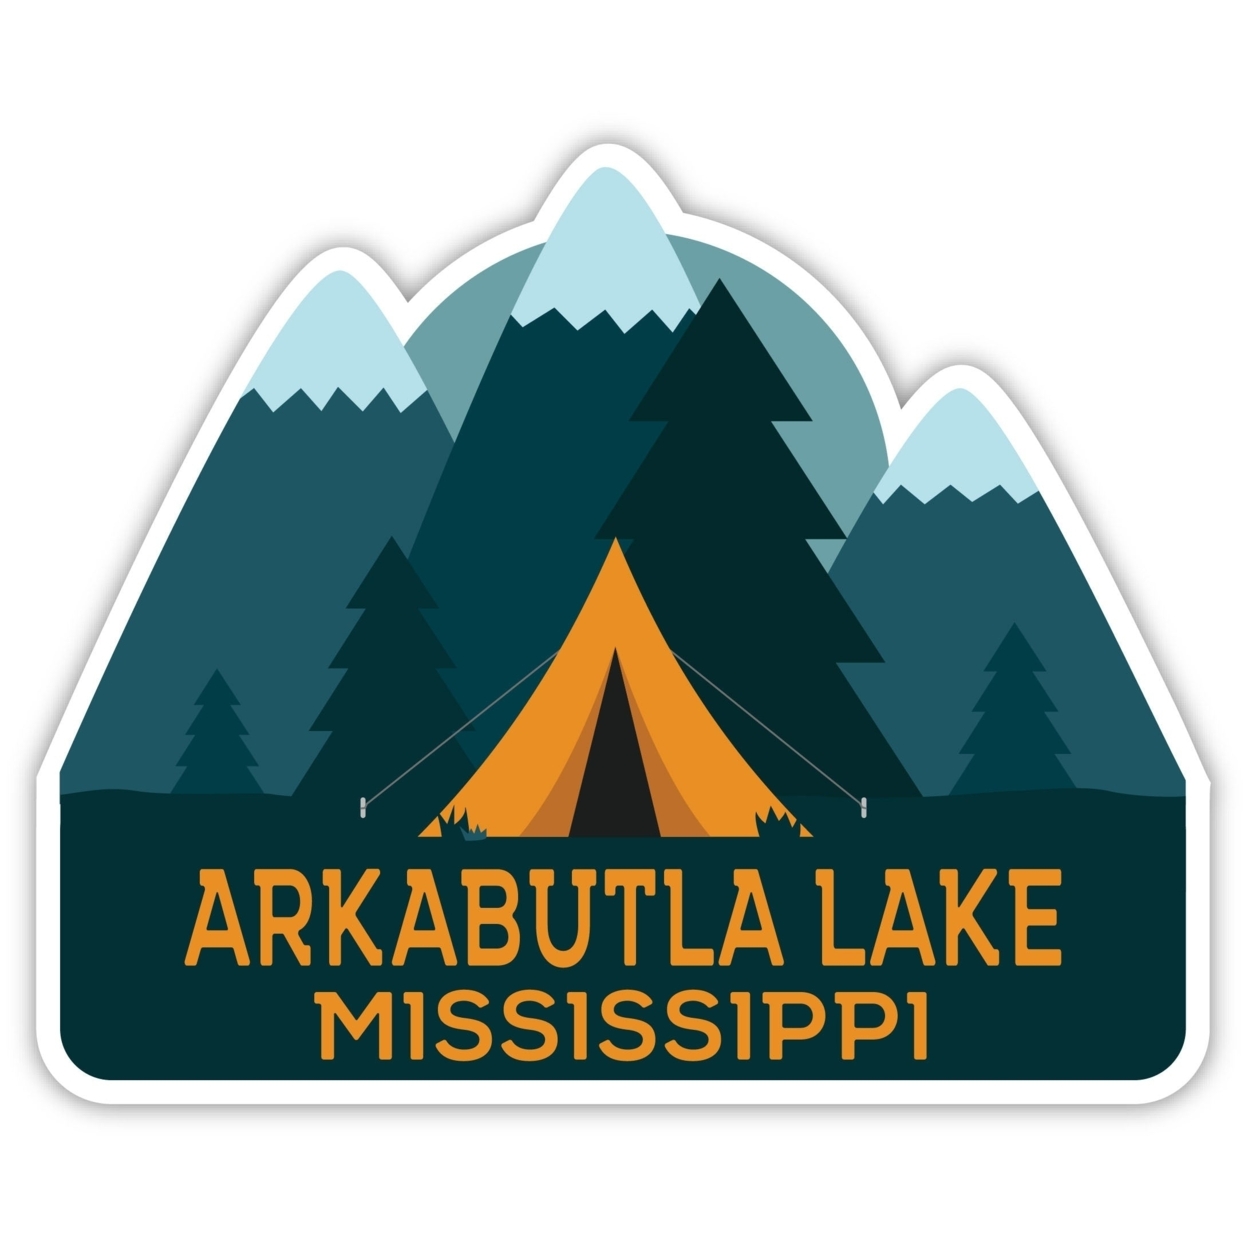 Arkabutla Lake Mississippi Souvenir Decorative Stickers (Choose Theme And Size) - 4-Pack, 12-Inch, Tent